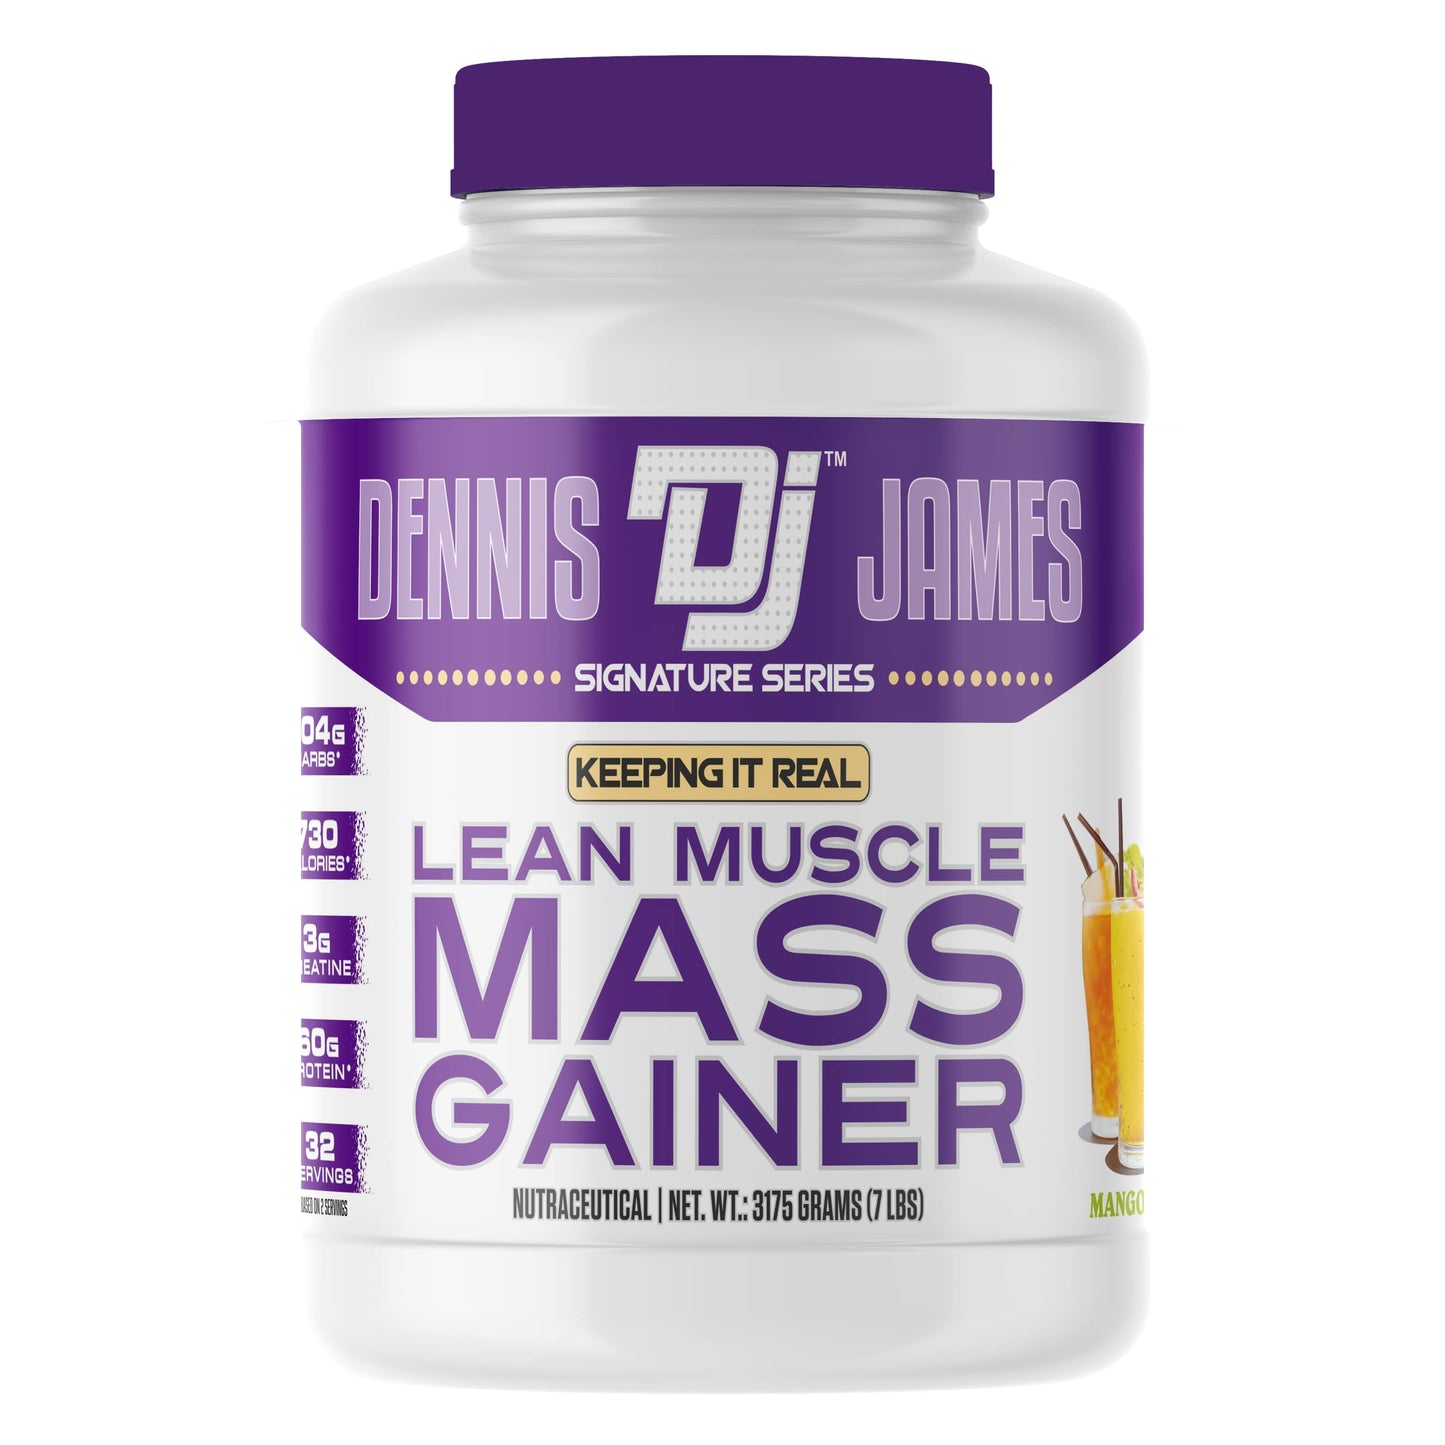 Dennis James Signature Series Lean Muscle Mass Gainer, 7Lbs